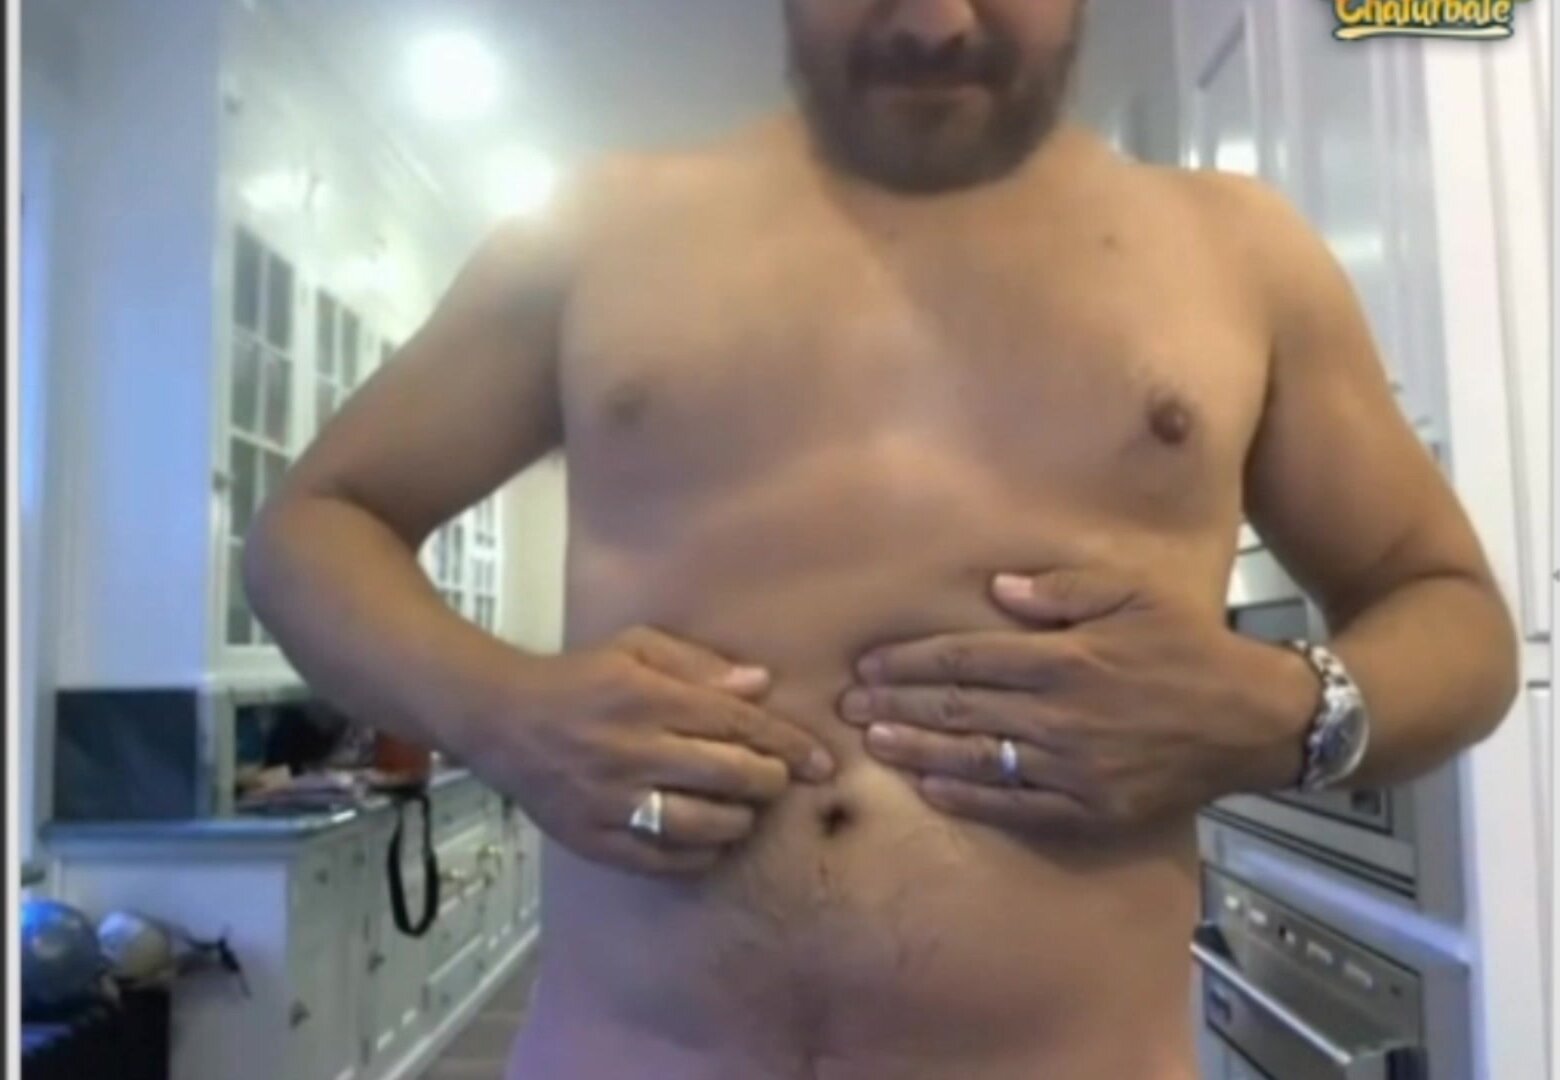 Men picking their belly buttons on live cams